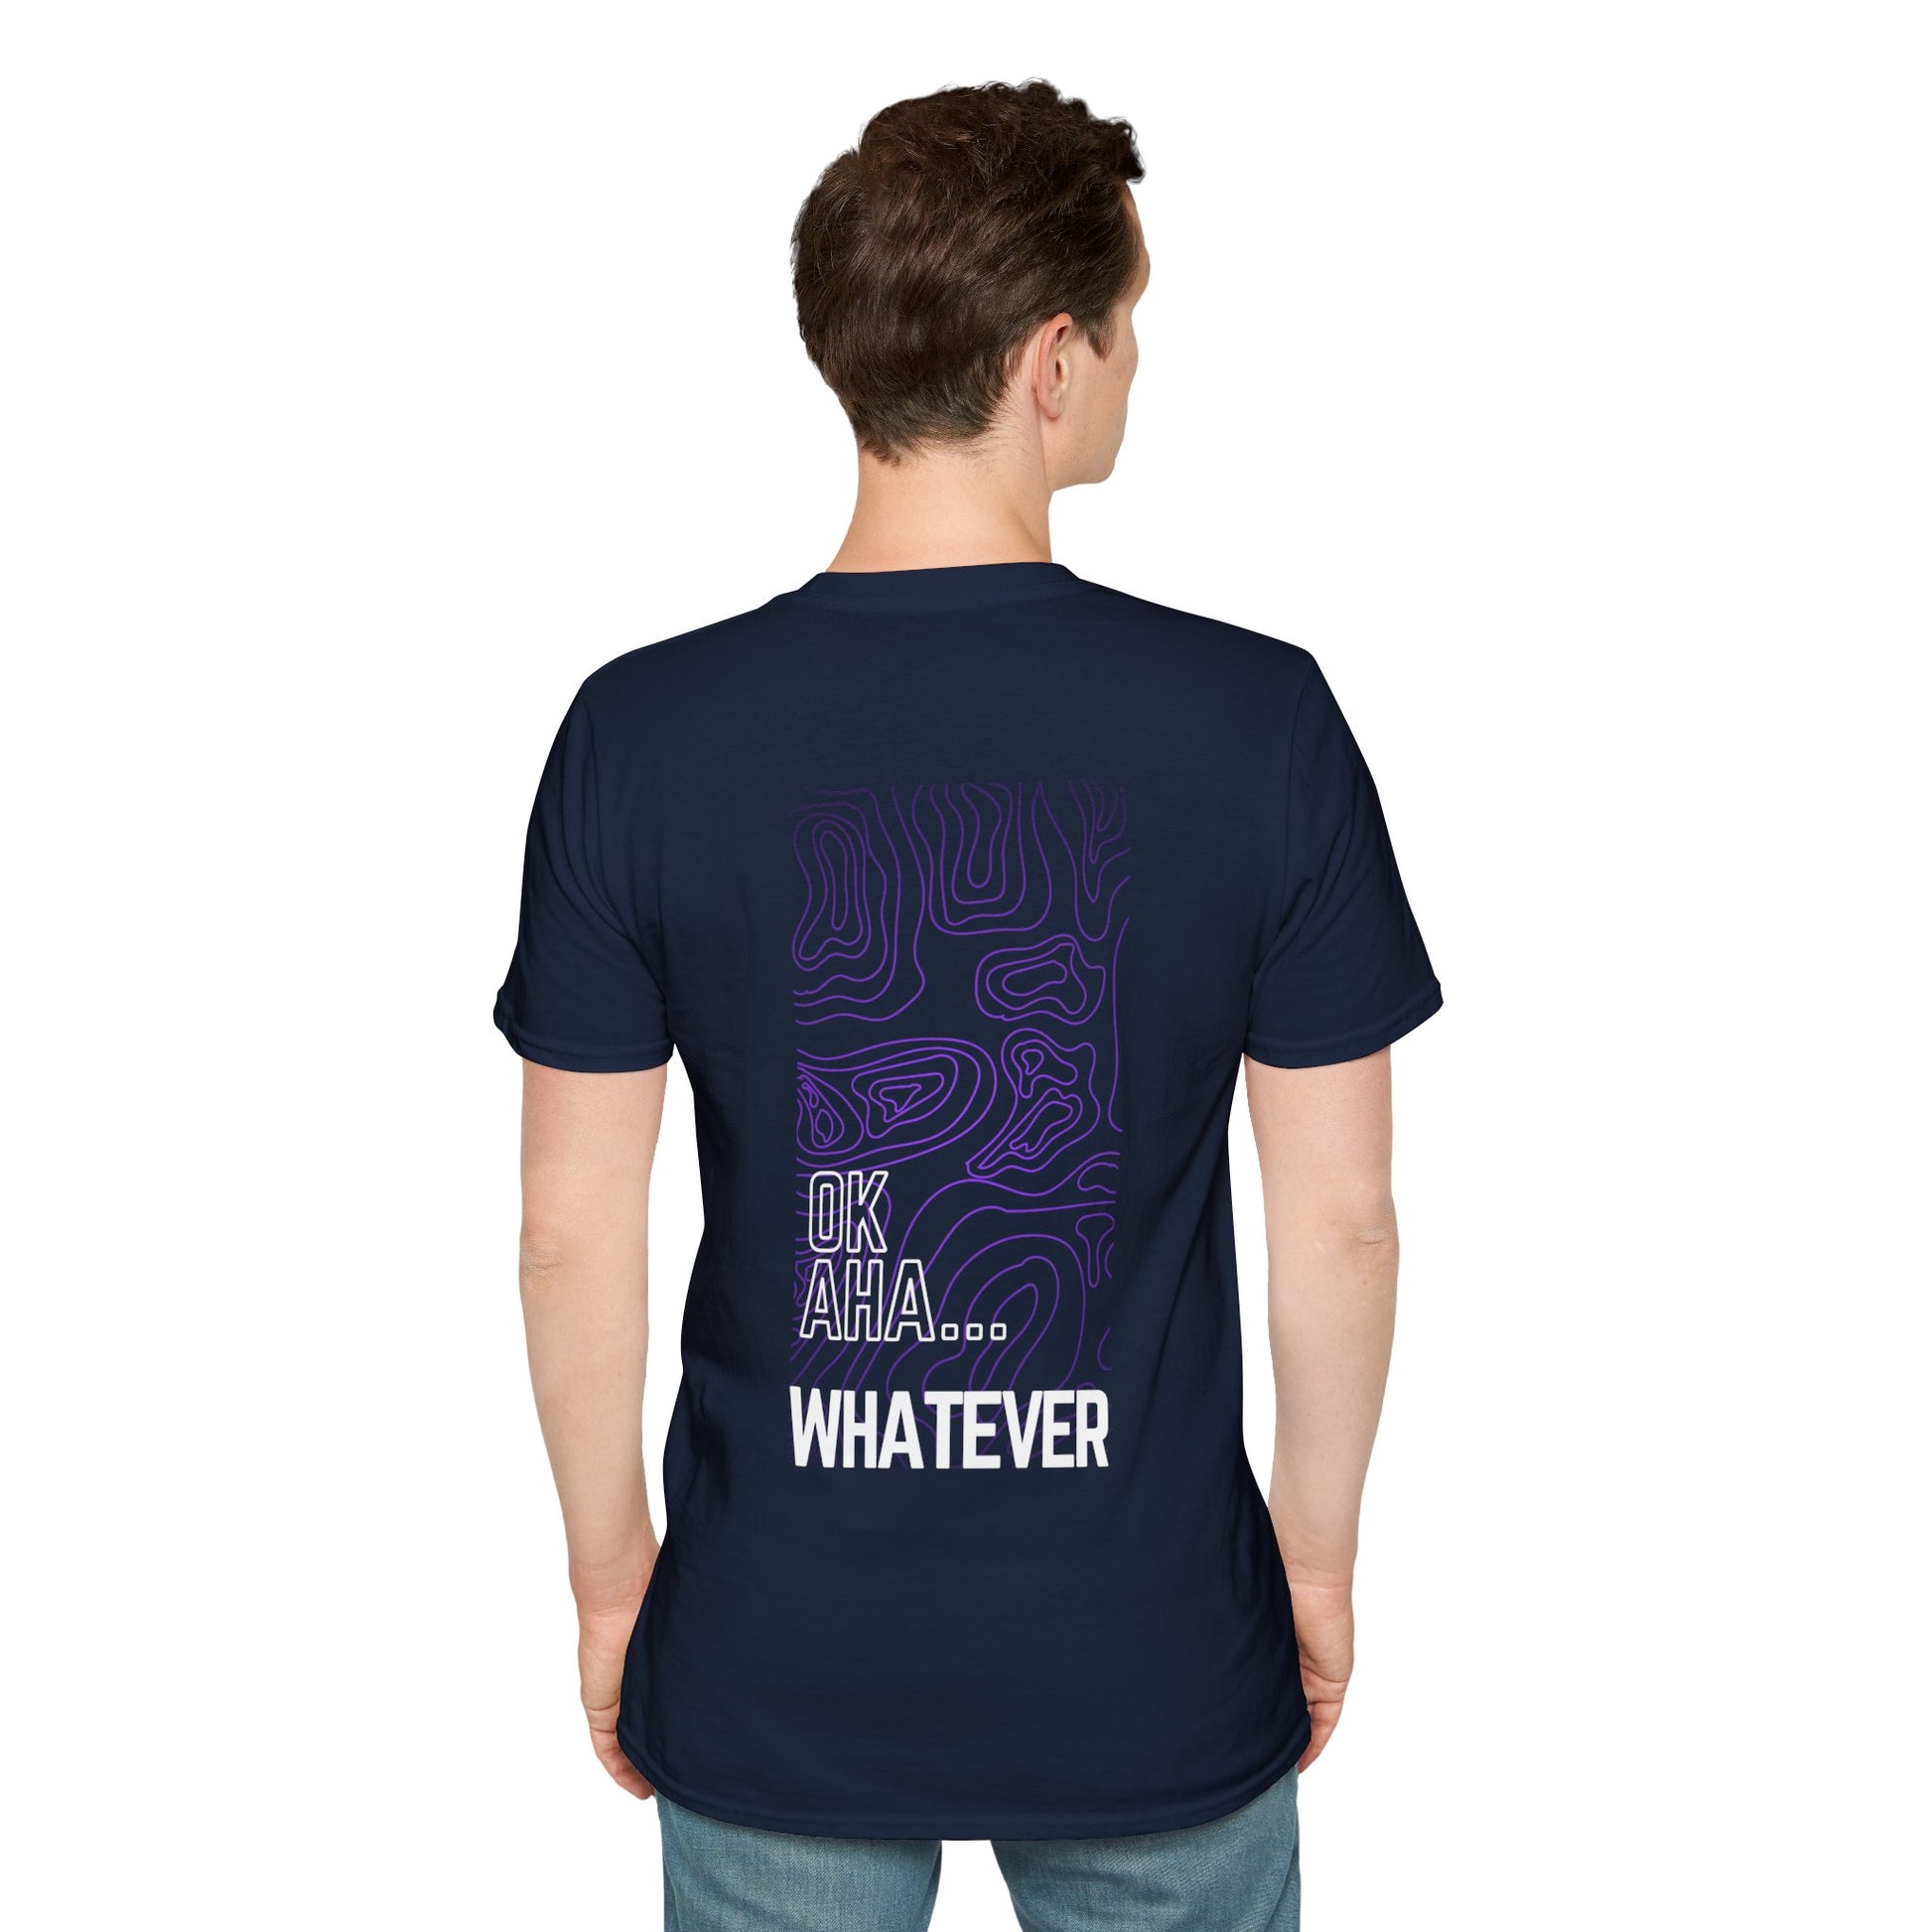 Navy T-shirt with a purple abstract pattern and the text ‘OK AHA... WHATEVER’ in large white letters